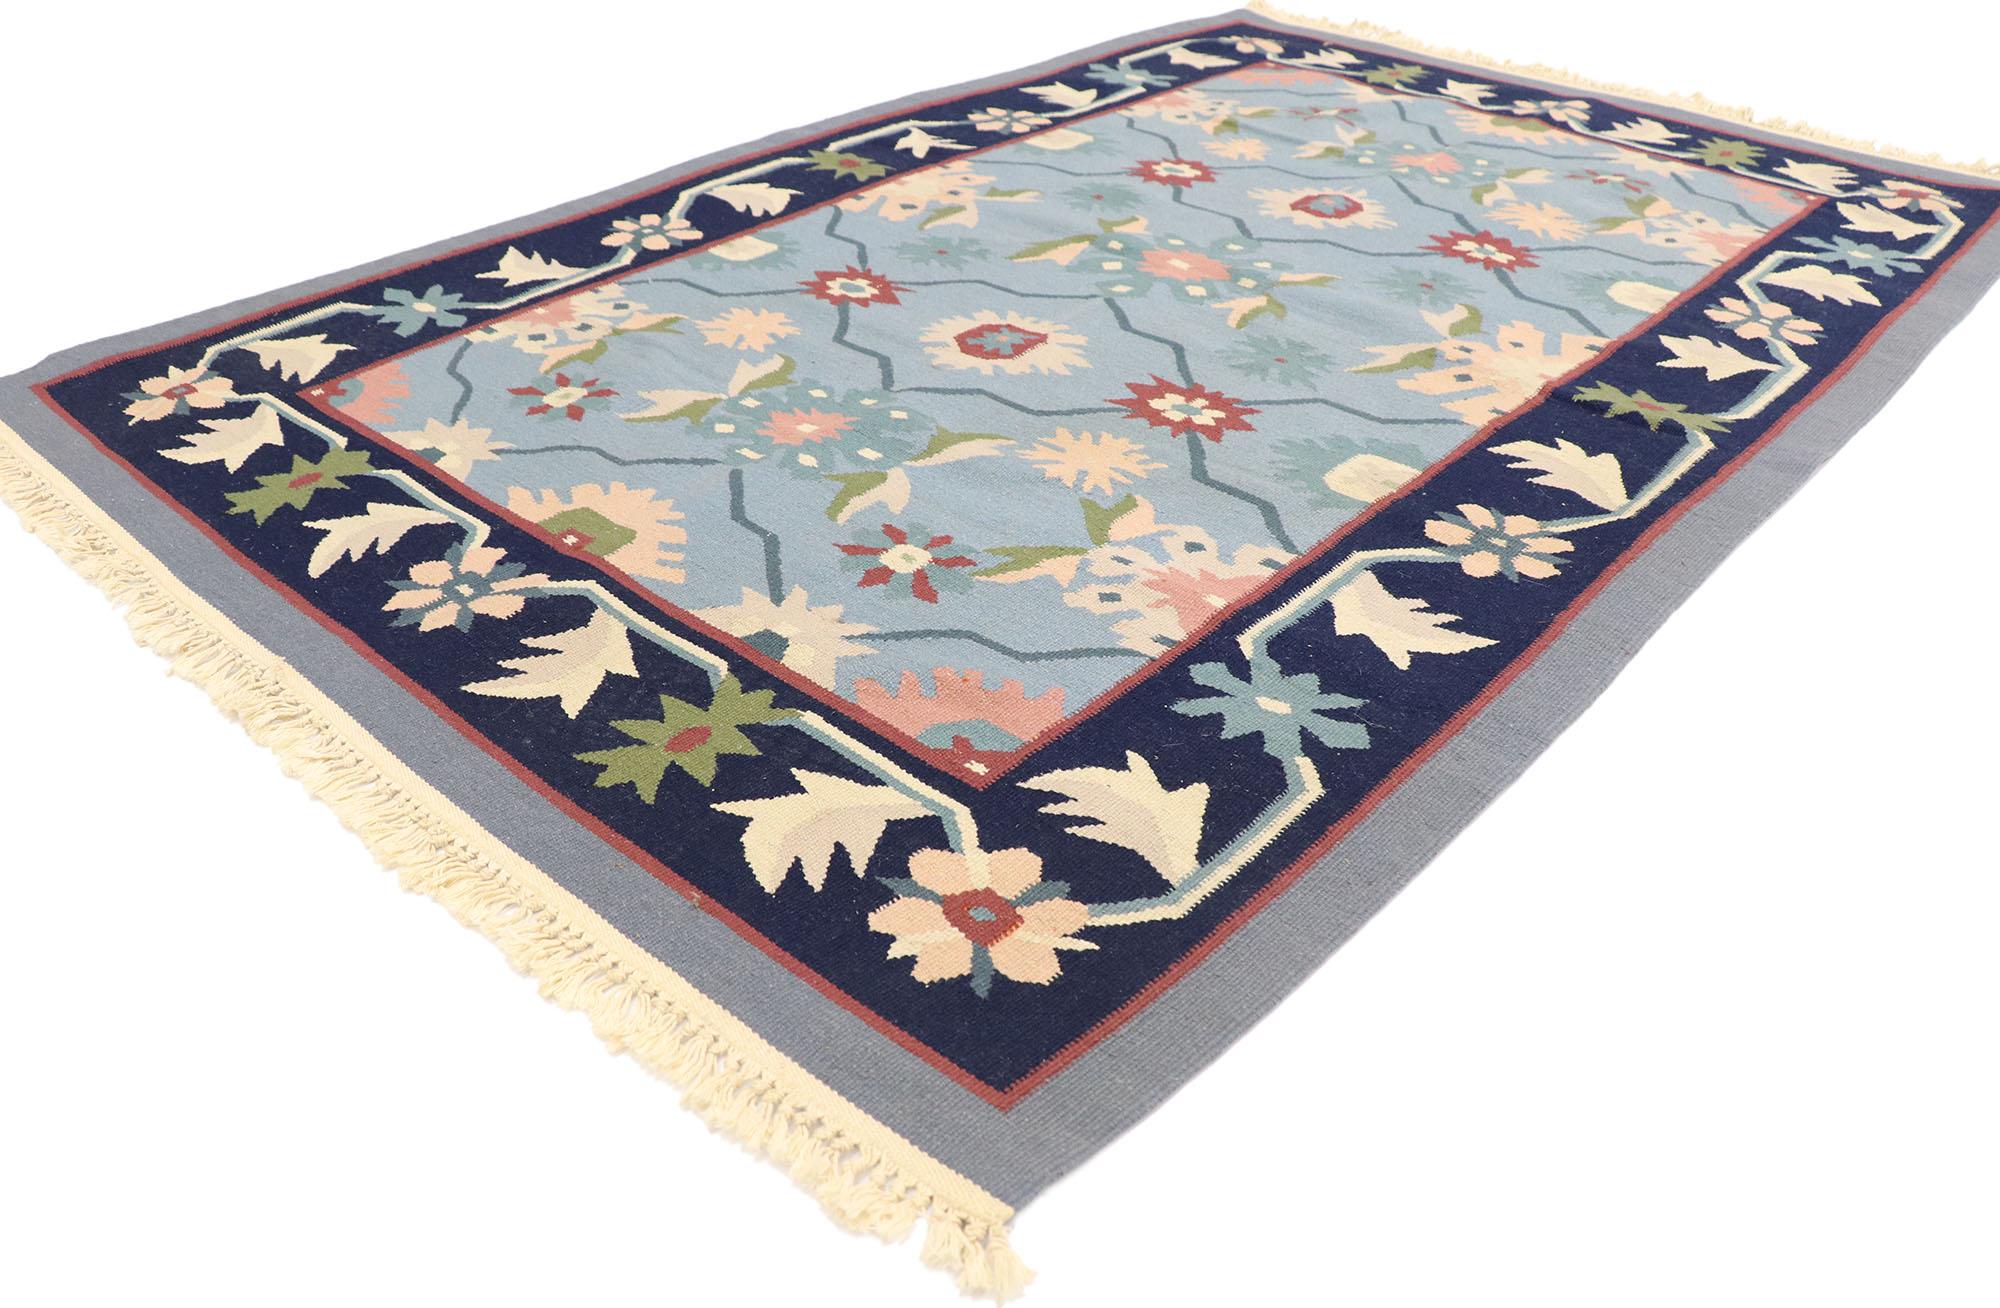 77954 Vintage Romanian Floral Kilim rug with Folk Art Cottage Style 03'11 x 05'11. Delicately feminine and beautifully traditional, this hand-woven wool vintage Romanian floral kilim rug is poised to impress. The sky blue abrashed field features an